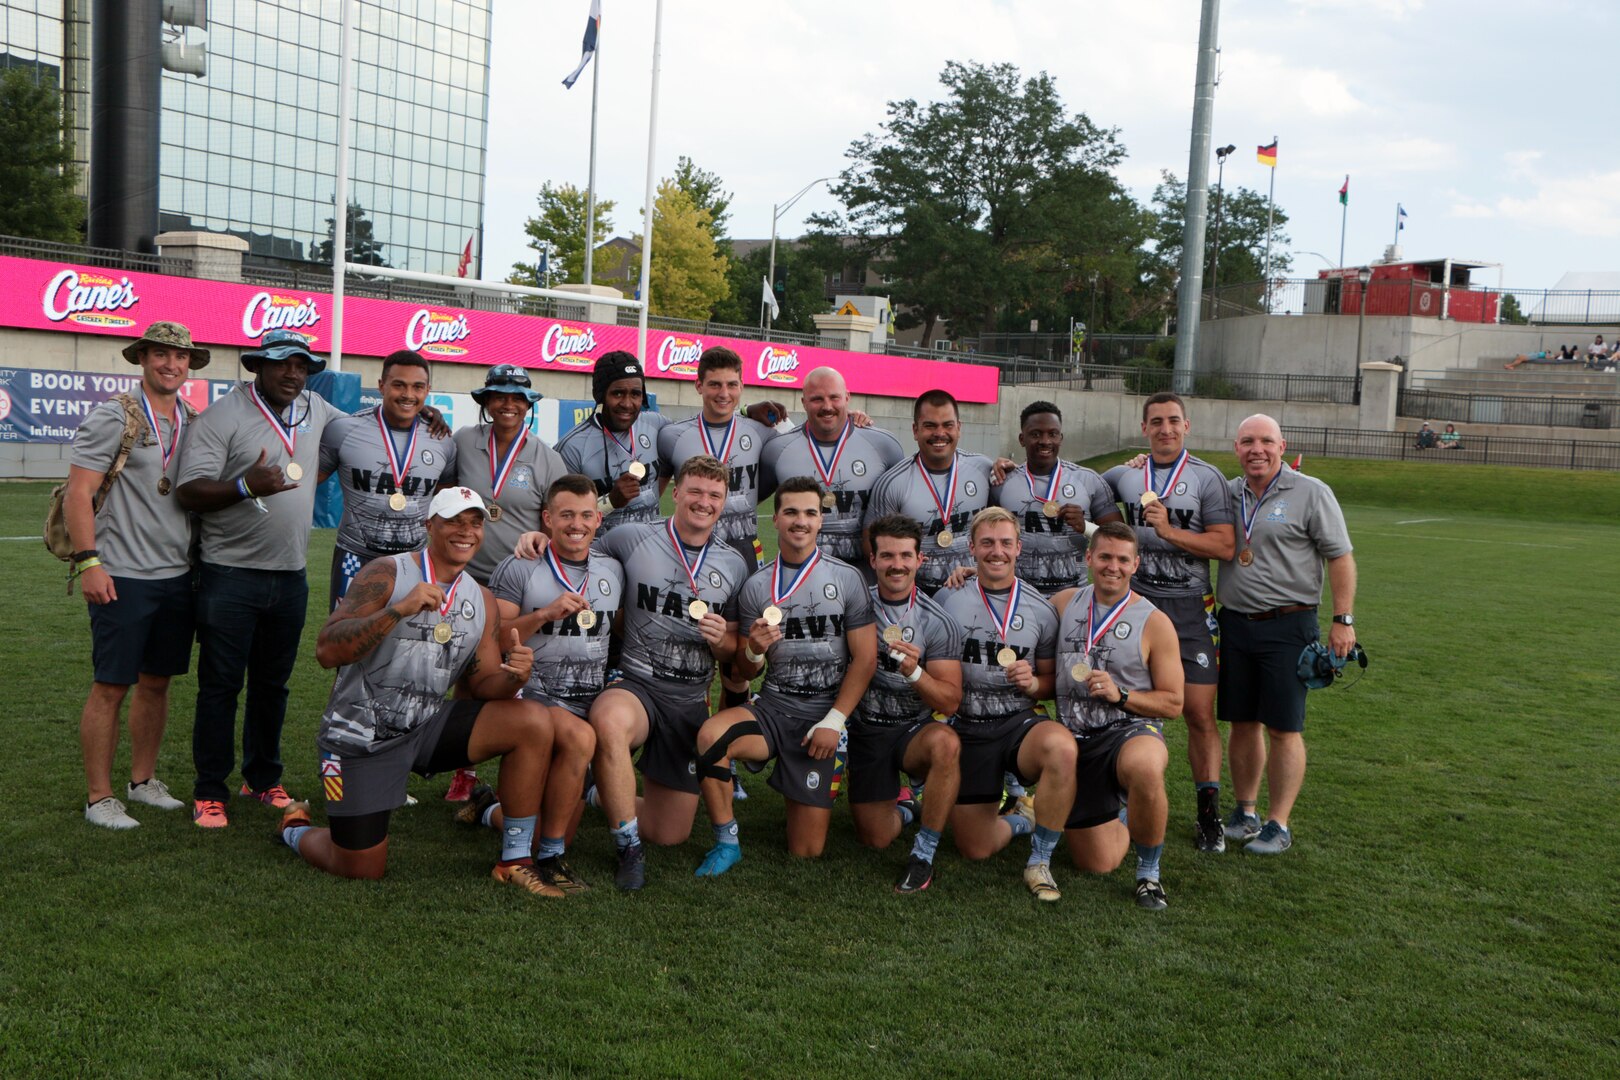 Navy tops Air Force to win first Armed Forces Men’s Rugby Championship